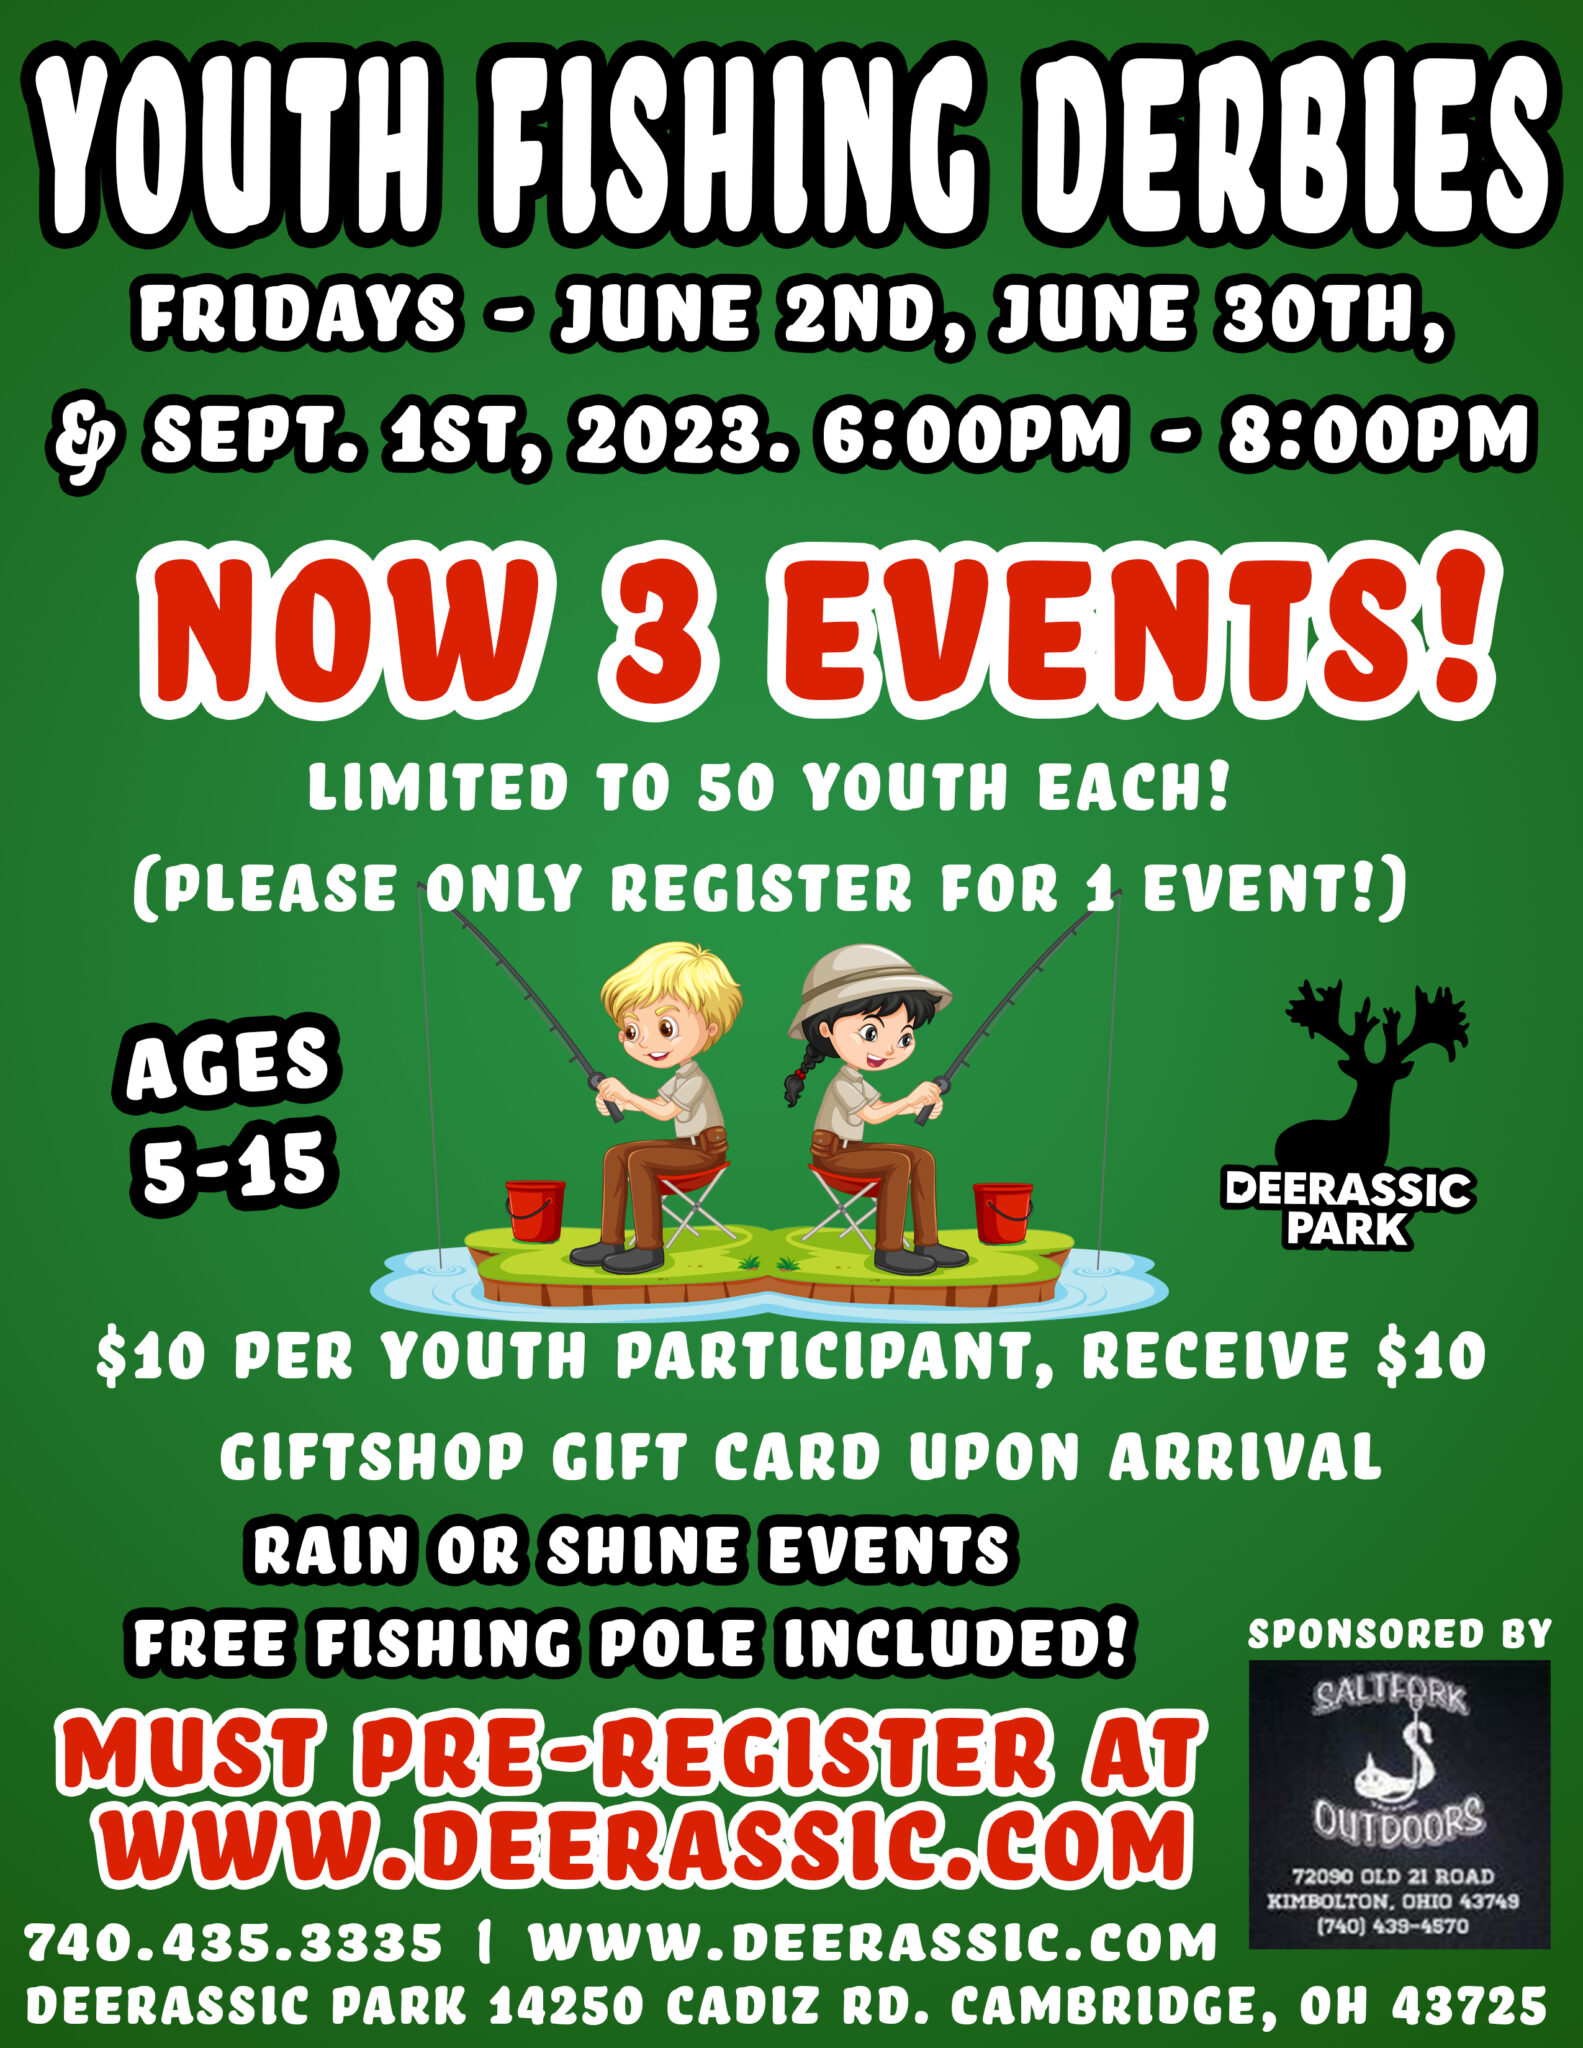 Youth Fishing Derbies Deerassic Park Education Center